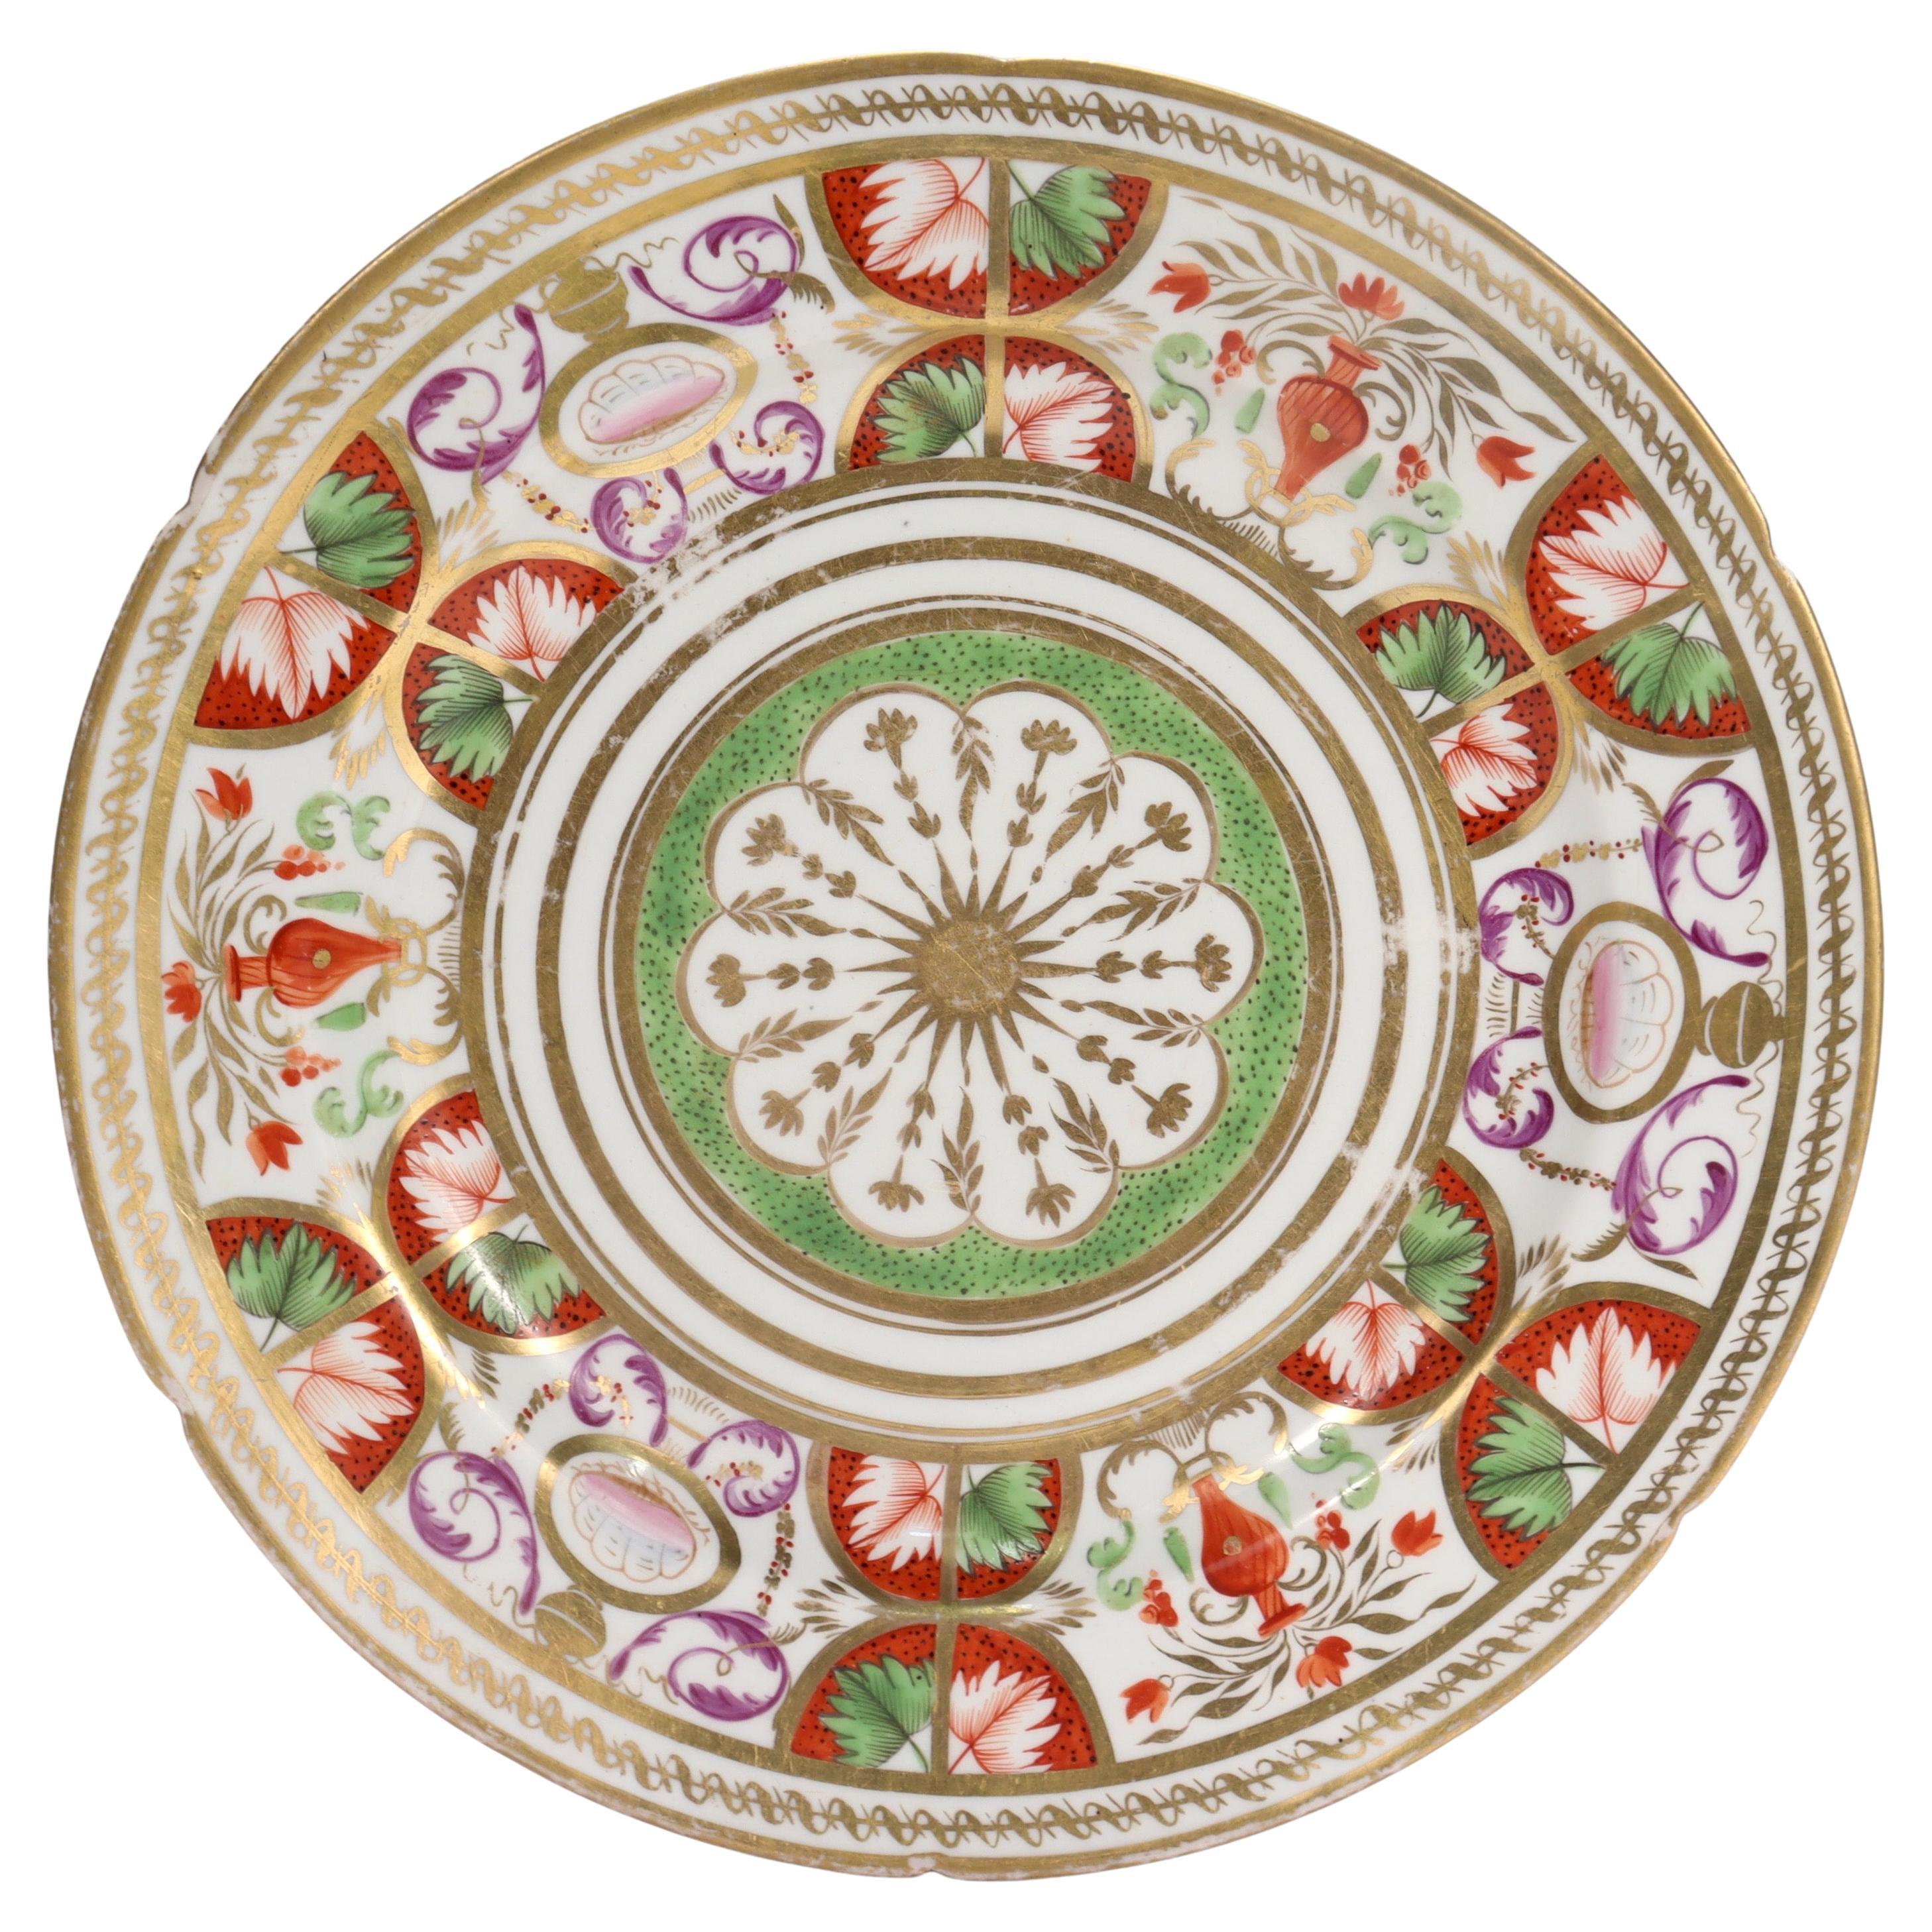 Antique English Neoclassical Porcelain Plate attributed to Coalport For Sale